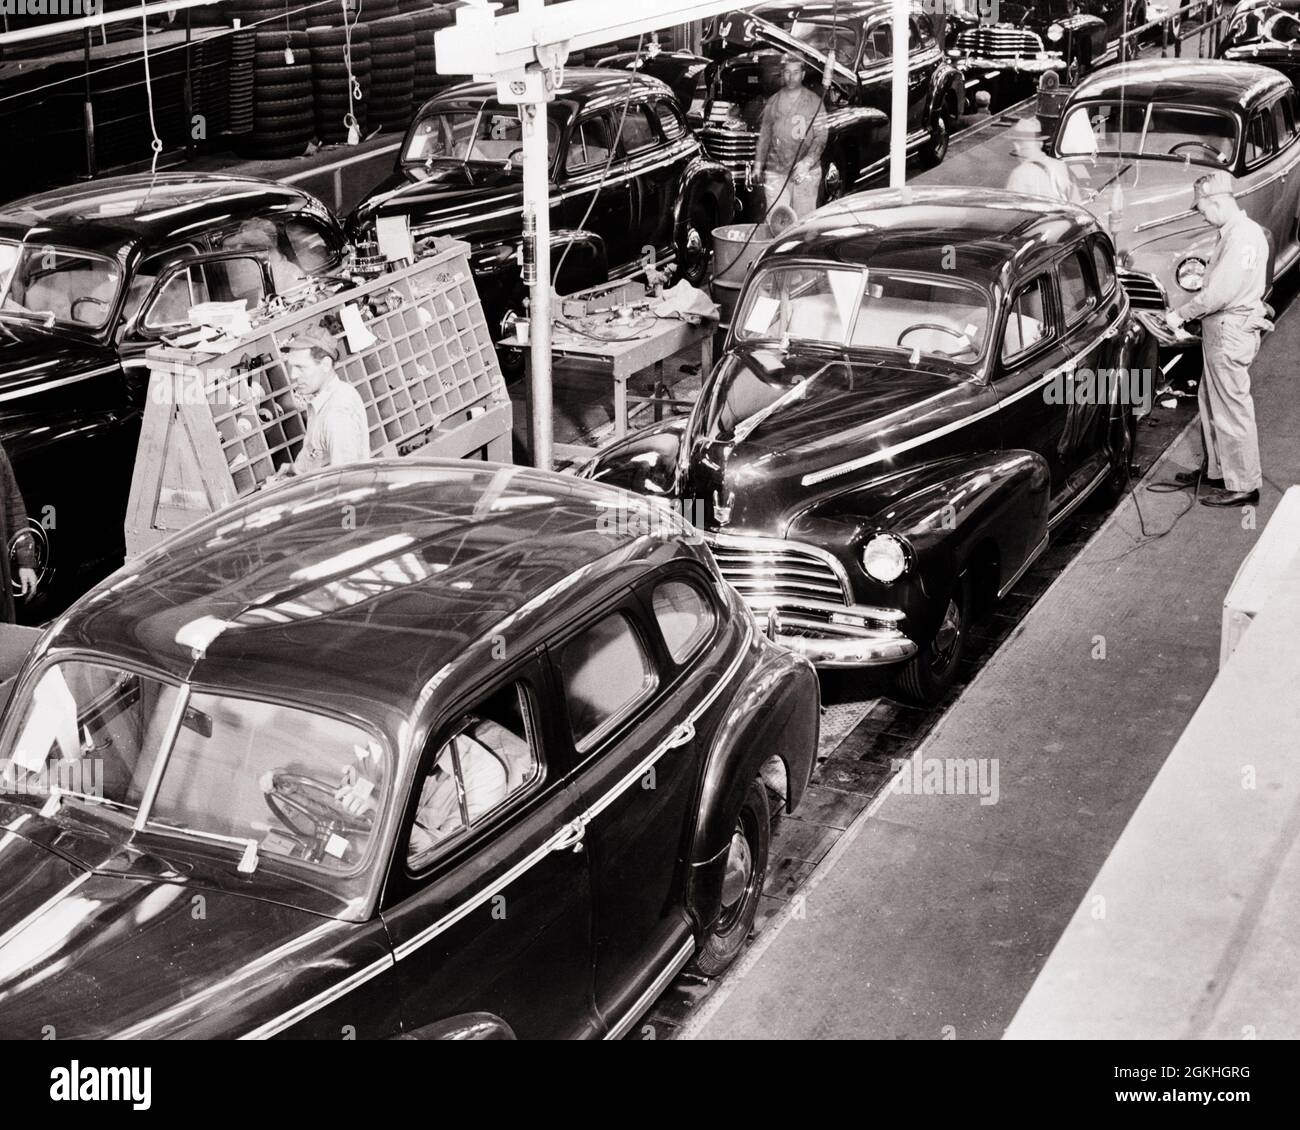 1940s SKILLED CREW OF ANONYMOUS MEN WORKING ON AUTOMOBILE ASSEMBLY LINE MANUFACTURING 1946 CHEVROLET CARS IN FLINT MICHIGAN USA - q74077 CPC001 HARS MIDDLE-AGED B&W CHEVROLET NORTH AMERICA MIDDLE-AGED MAN NORTH AMERICAN WIDE ANGLE SKILL OCCUPATION SKILLS HIGH ANGLE AUTOS CAREERS LABOR IN OF ON EMPLOYMENT MANUFACTURING OCCUPATIONS MOTION BLUR AUTOMOBILES VEHICLES 1946 FLINT SKILLED ANONYMOUS EMPLOYEE MID-ADULT MID-ADULT MAN BLACK AND WHITE CAUCASIAN ETHNICITY LABORING MI OLD FASHIONED Stock Photo